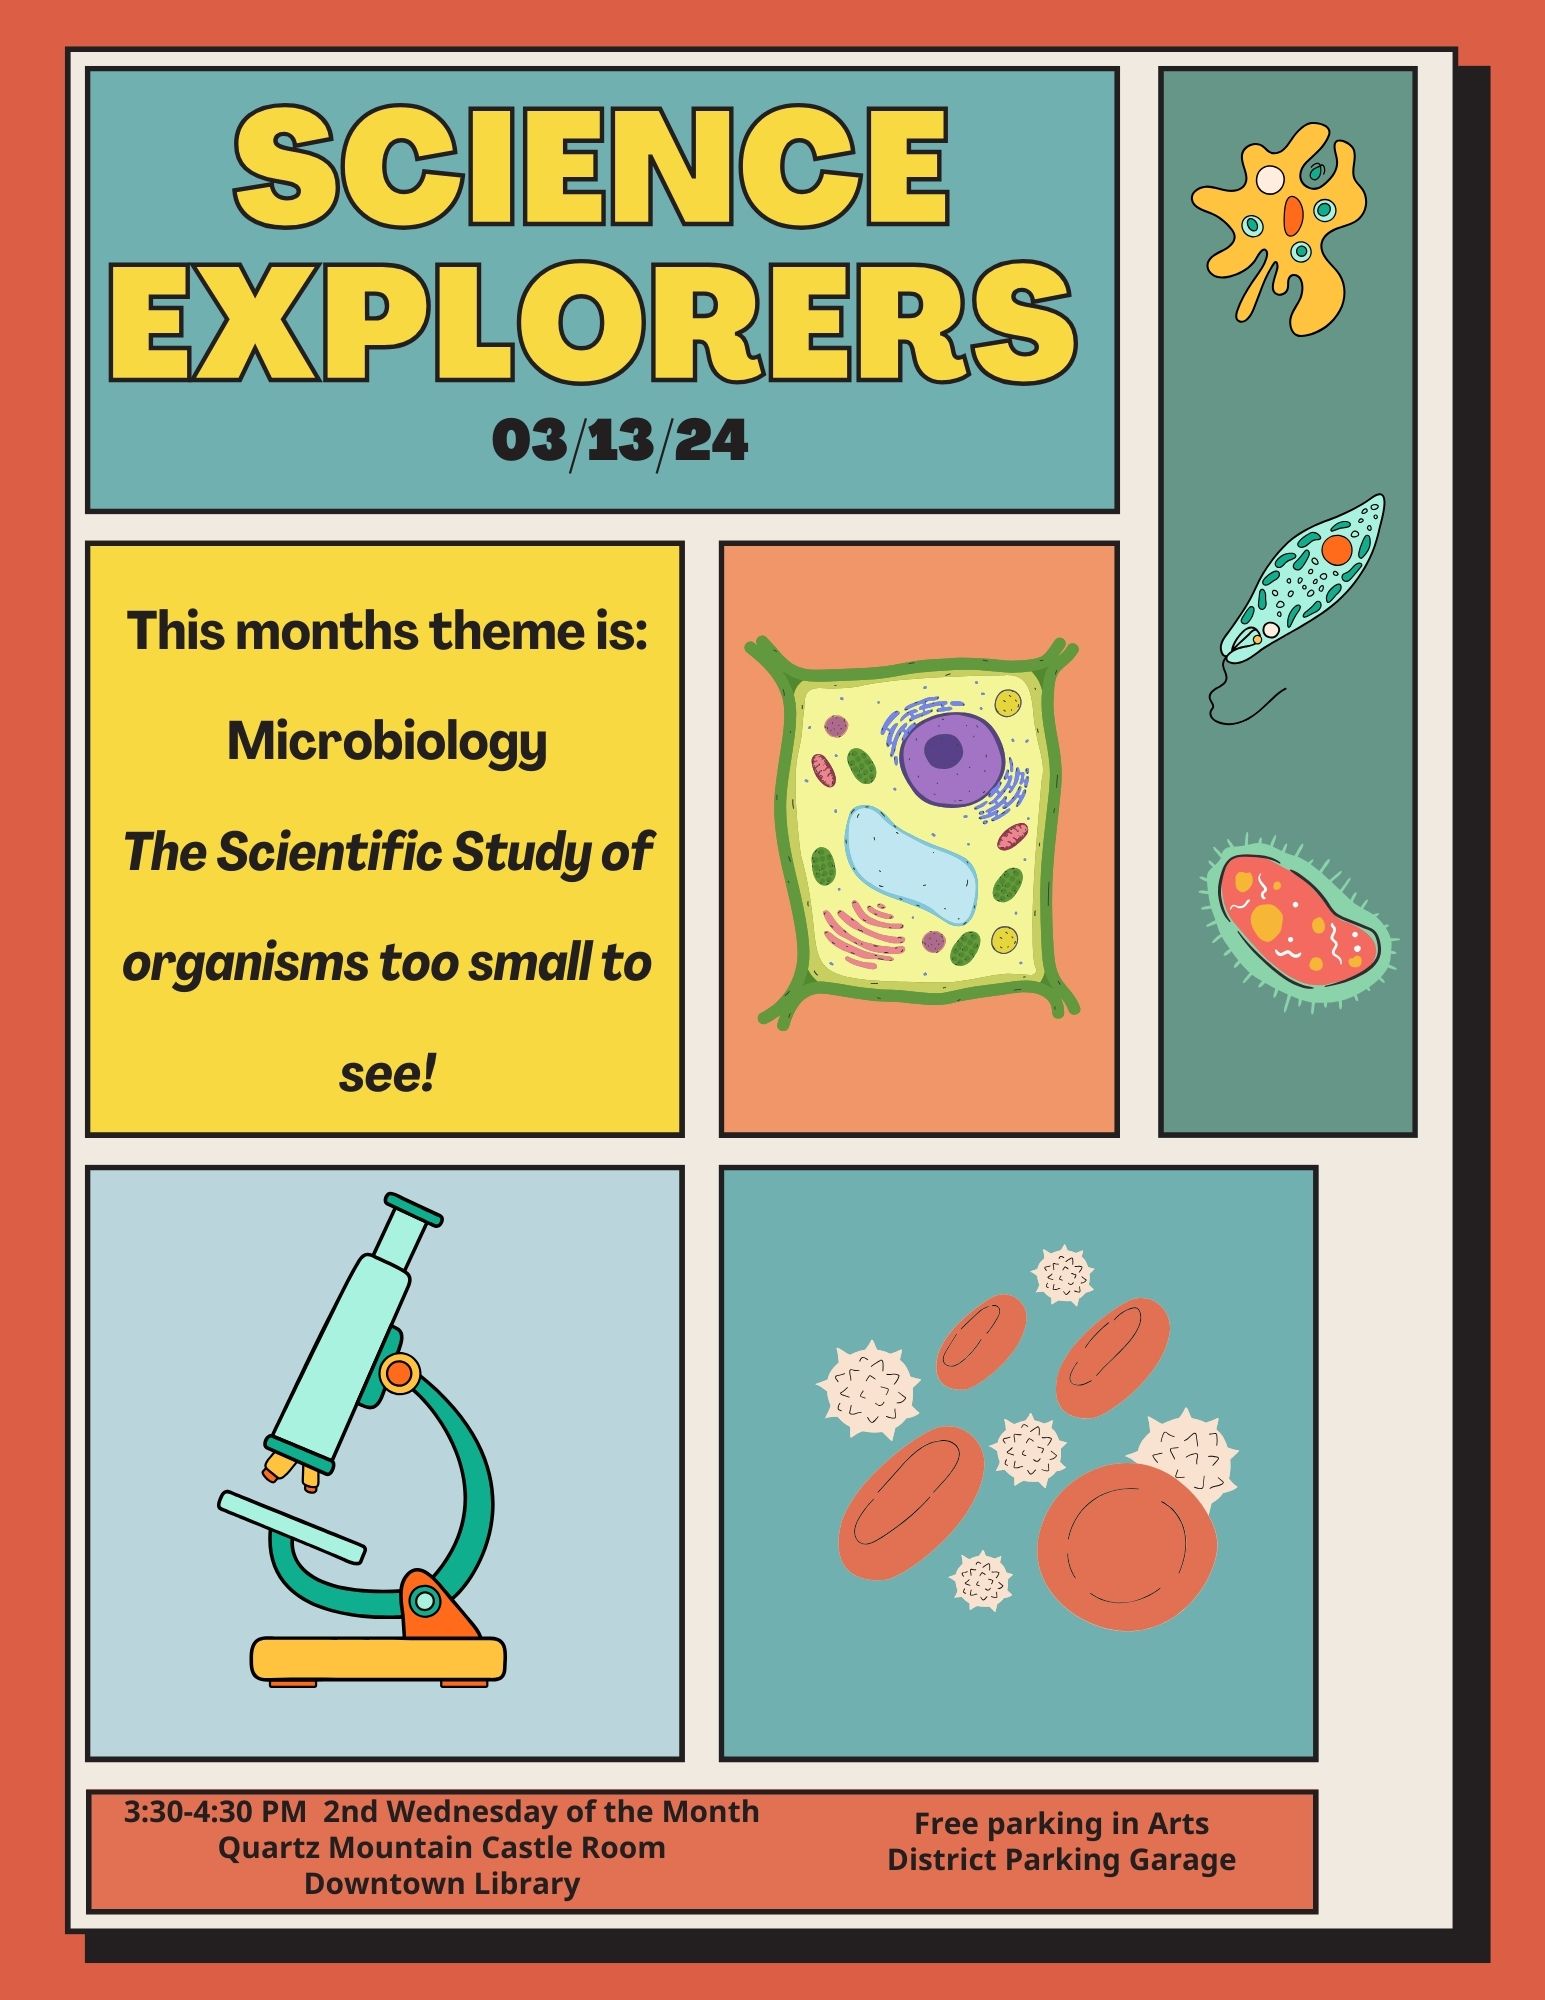 Vintage poster featuring images of a microscope, plant cell, and blood cells. Text reads: Science Explorers 03/13/24 This months theme is: Microbiology The Scientific Study of organisms too small to see!